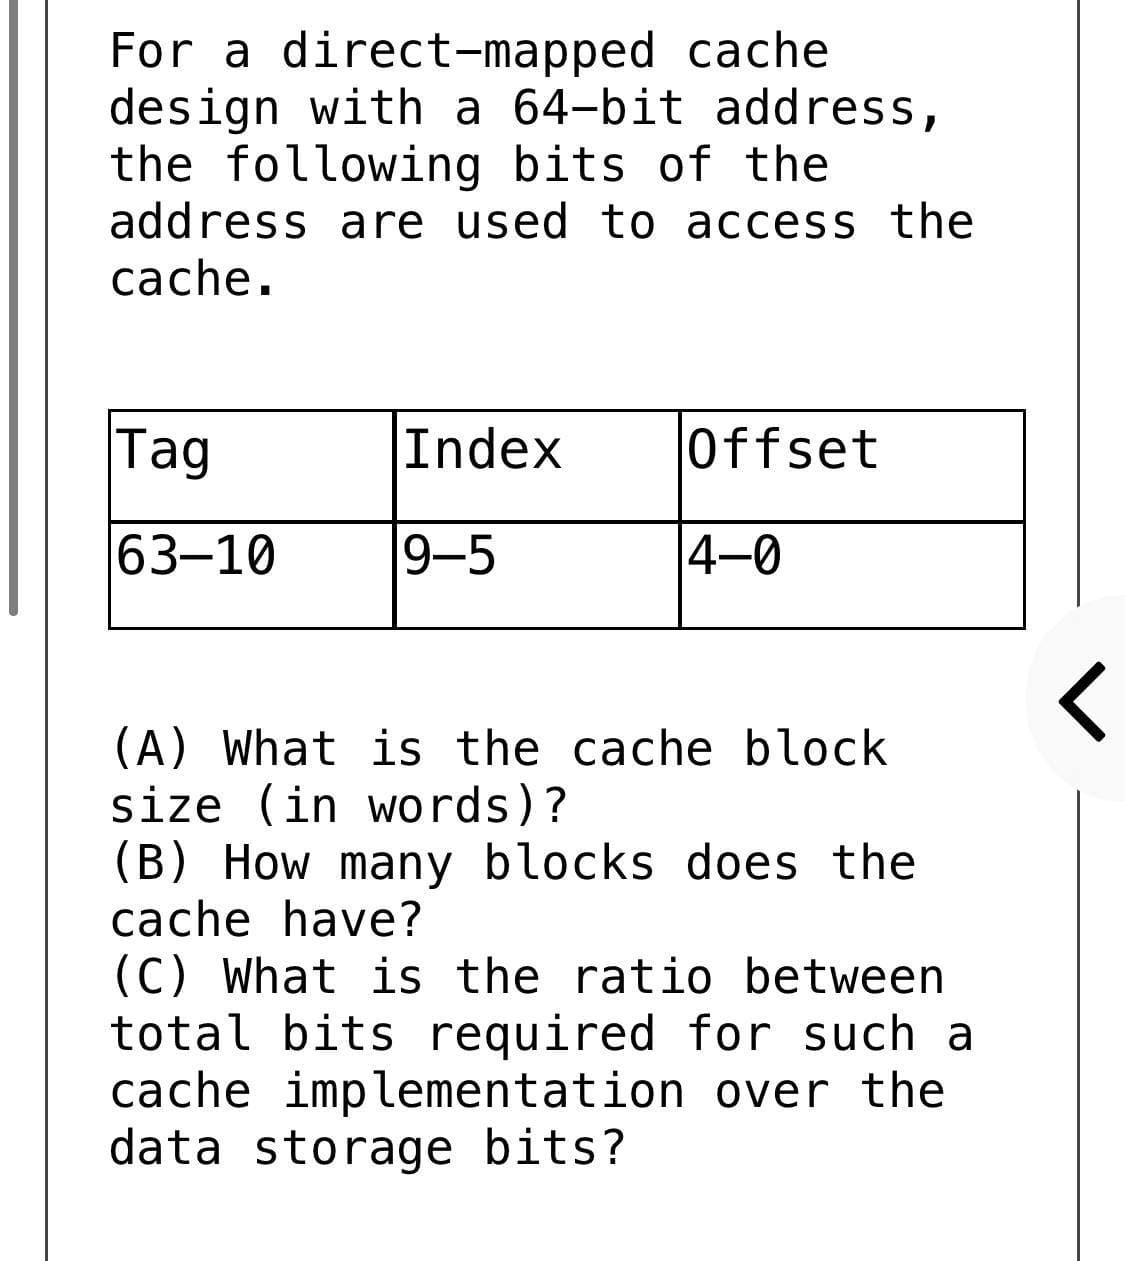 For a direct-mapped cache
design with a 64-bit address,
the following bits of the
address are used to access the
cache.
Tag
Index
Offset
63-10
9-5
4-0
(A) What is the cache block
size (in words)?
(B) How many blocks does the
cache have?
(C) What is the ratio between
total bits required for such a
cache implementation over the
data storage bits?
